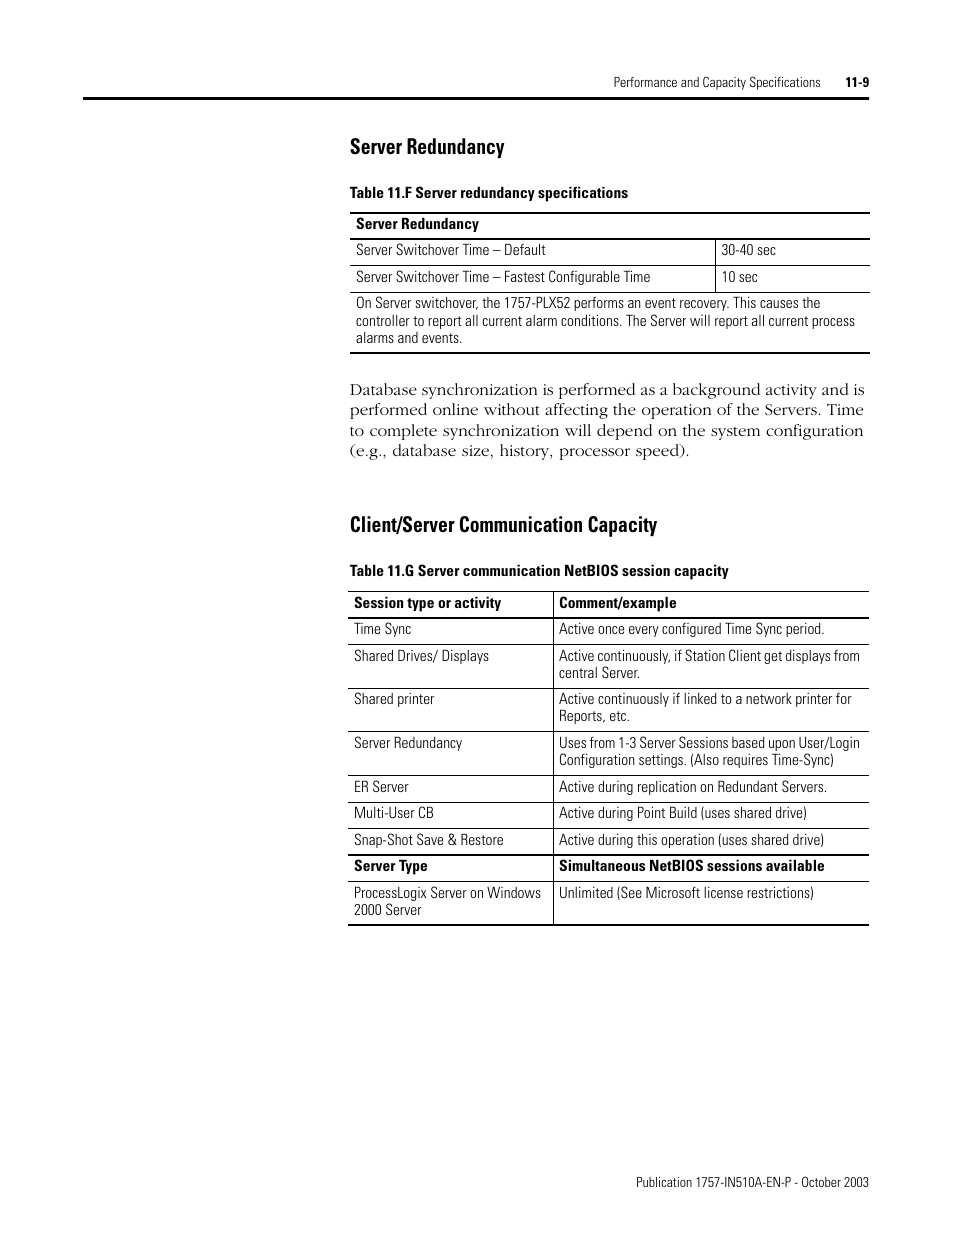 Server redundancy, Client/server communication capacity | Rockwell Automation 1757-SWKIT5100 ProcessLogix R510.0 Installation and Upgrade Guide User Manual | Page 249 / 271